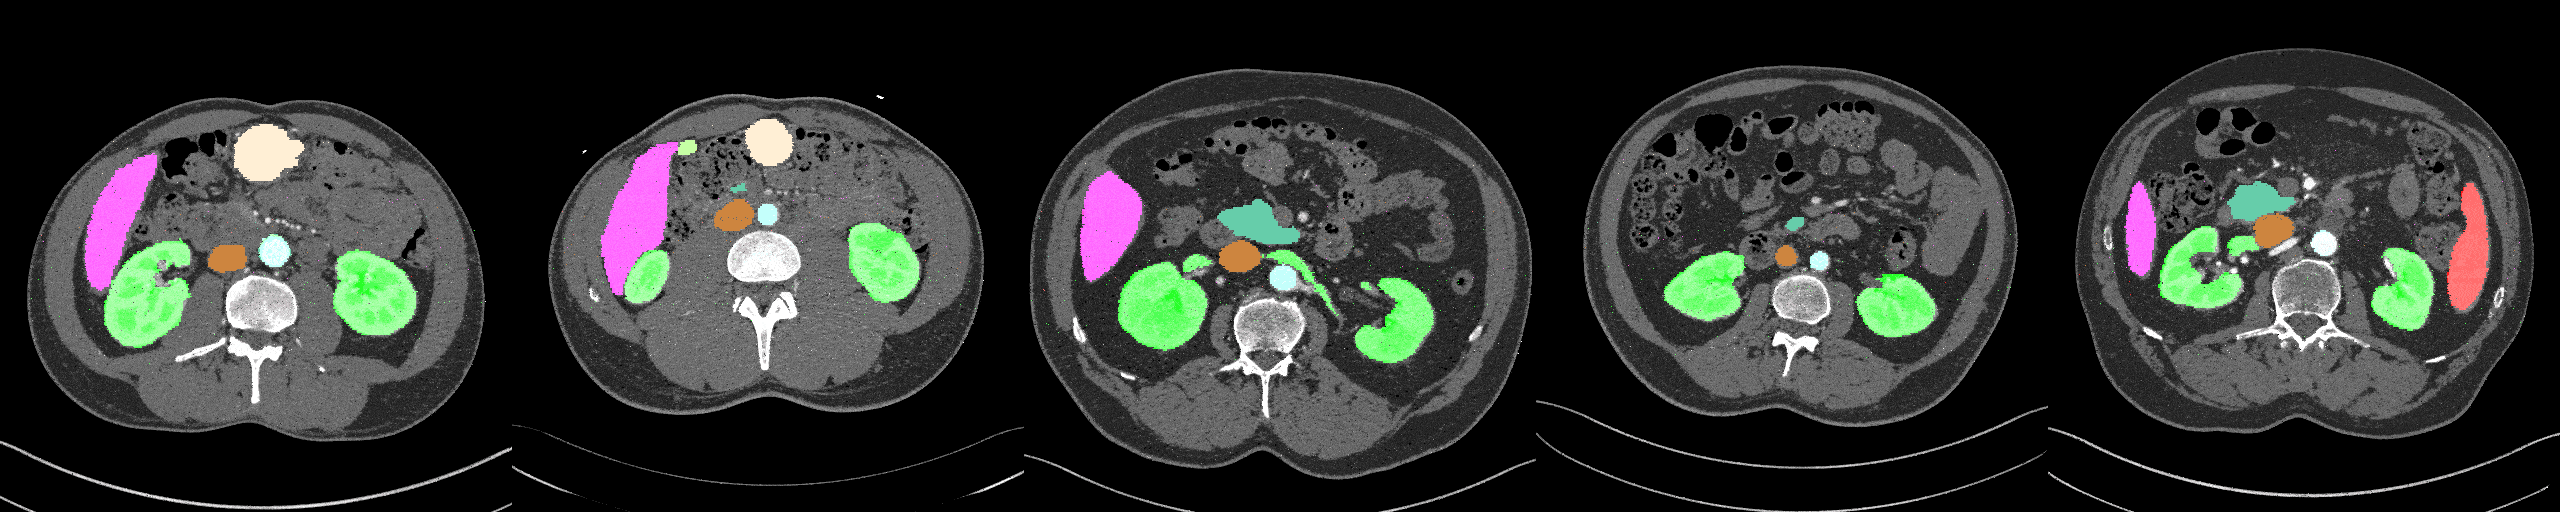 A GIF AbdomenAtlas-8K annotations as CT scans progress through five different abdomens. Annotations are colored on a black-and-white CT scan.